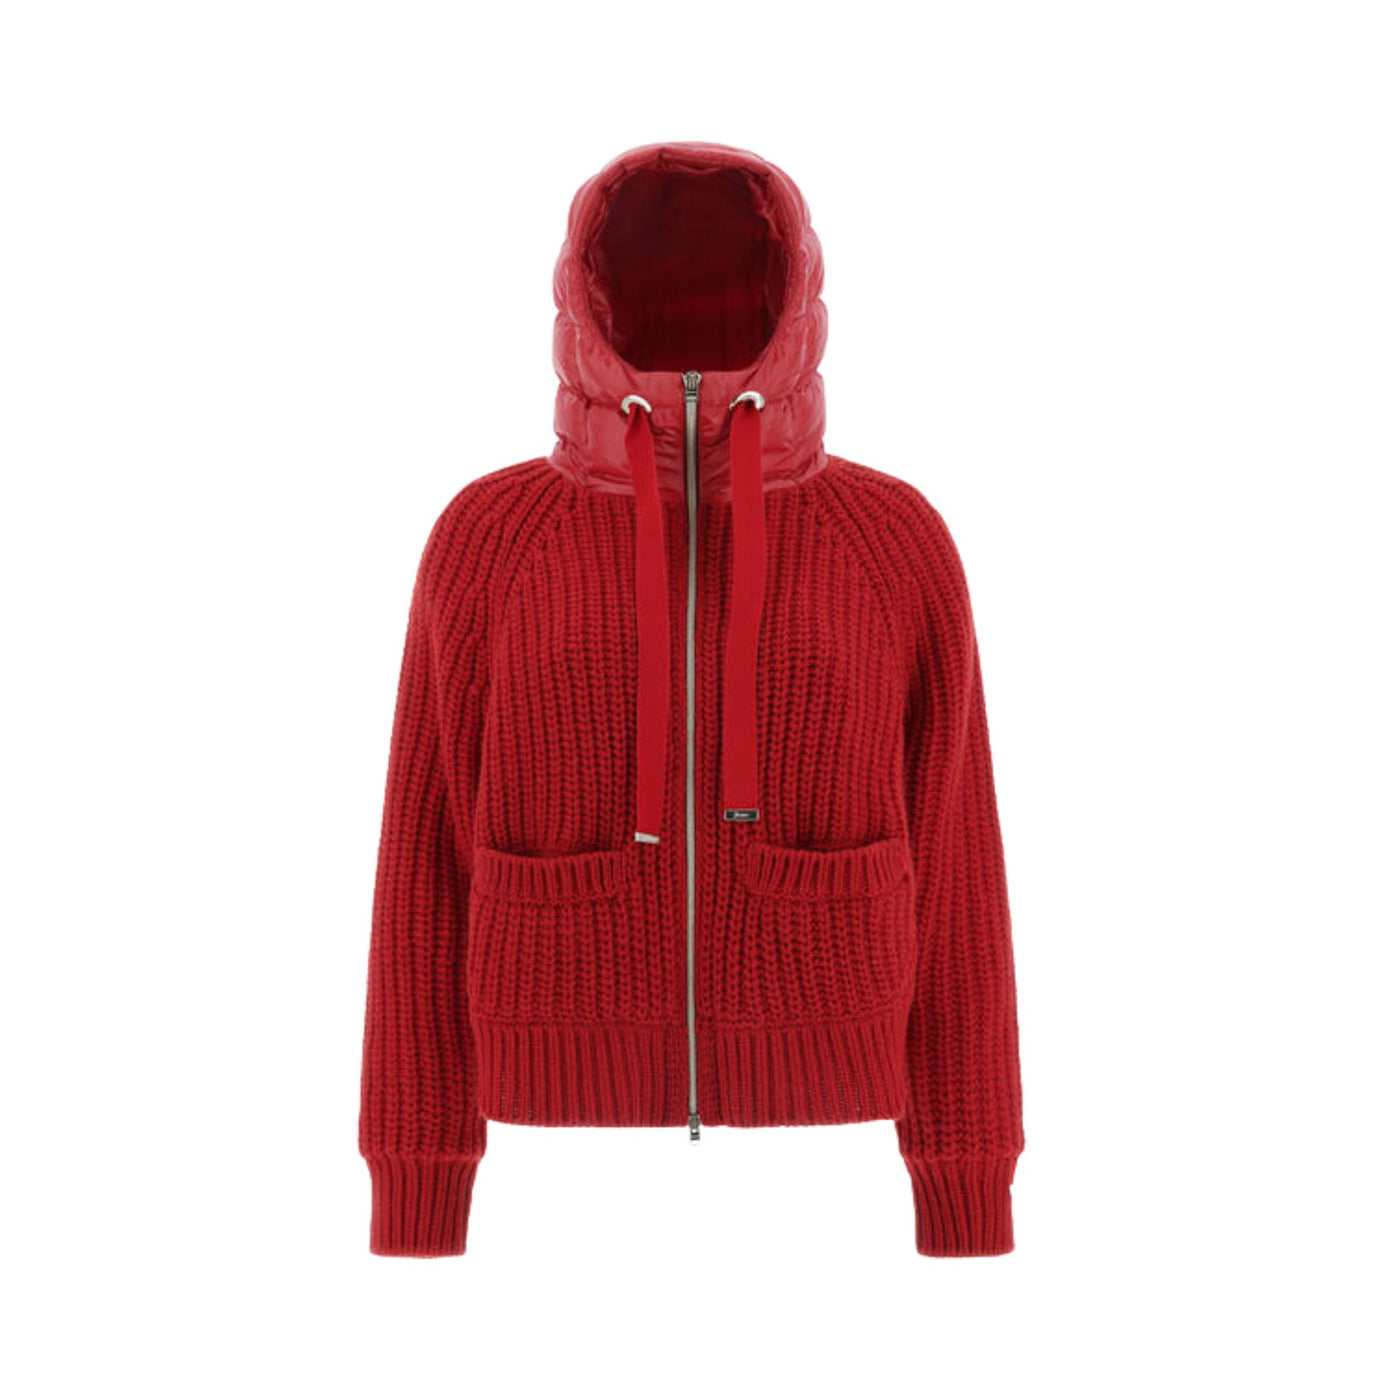 Women's knitted outerwear with hood